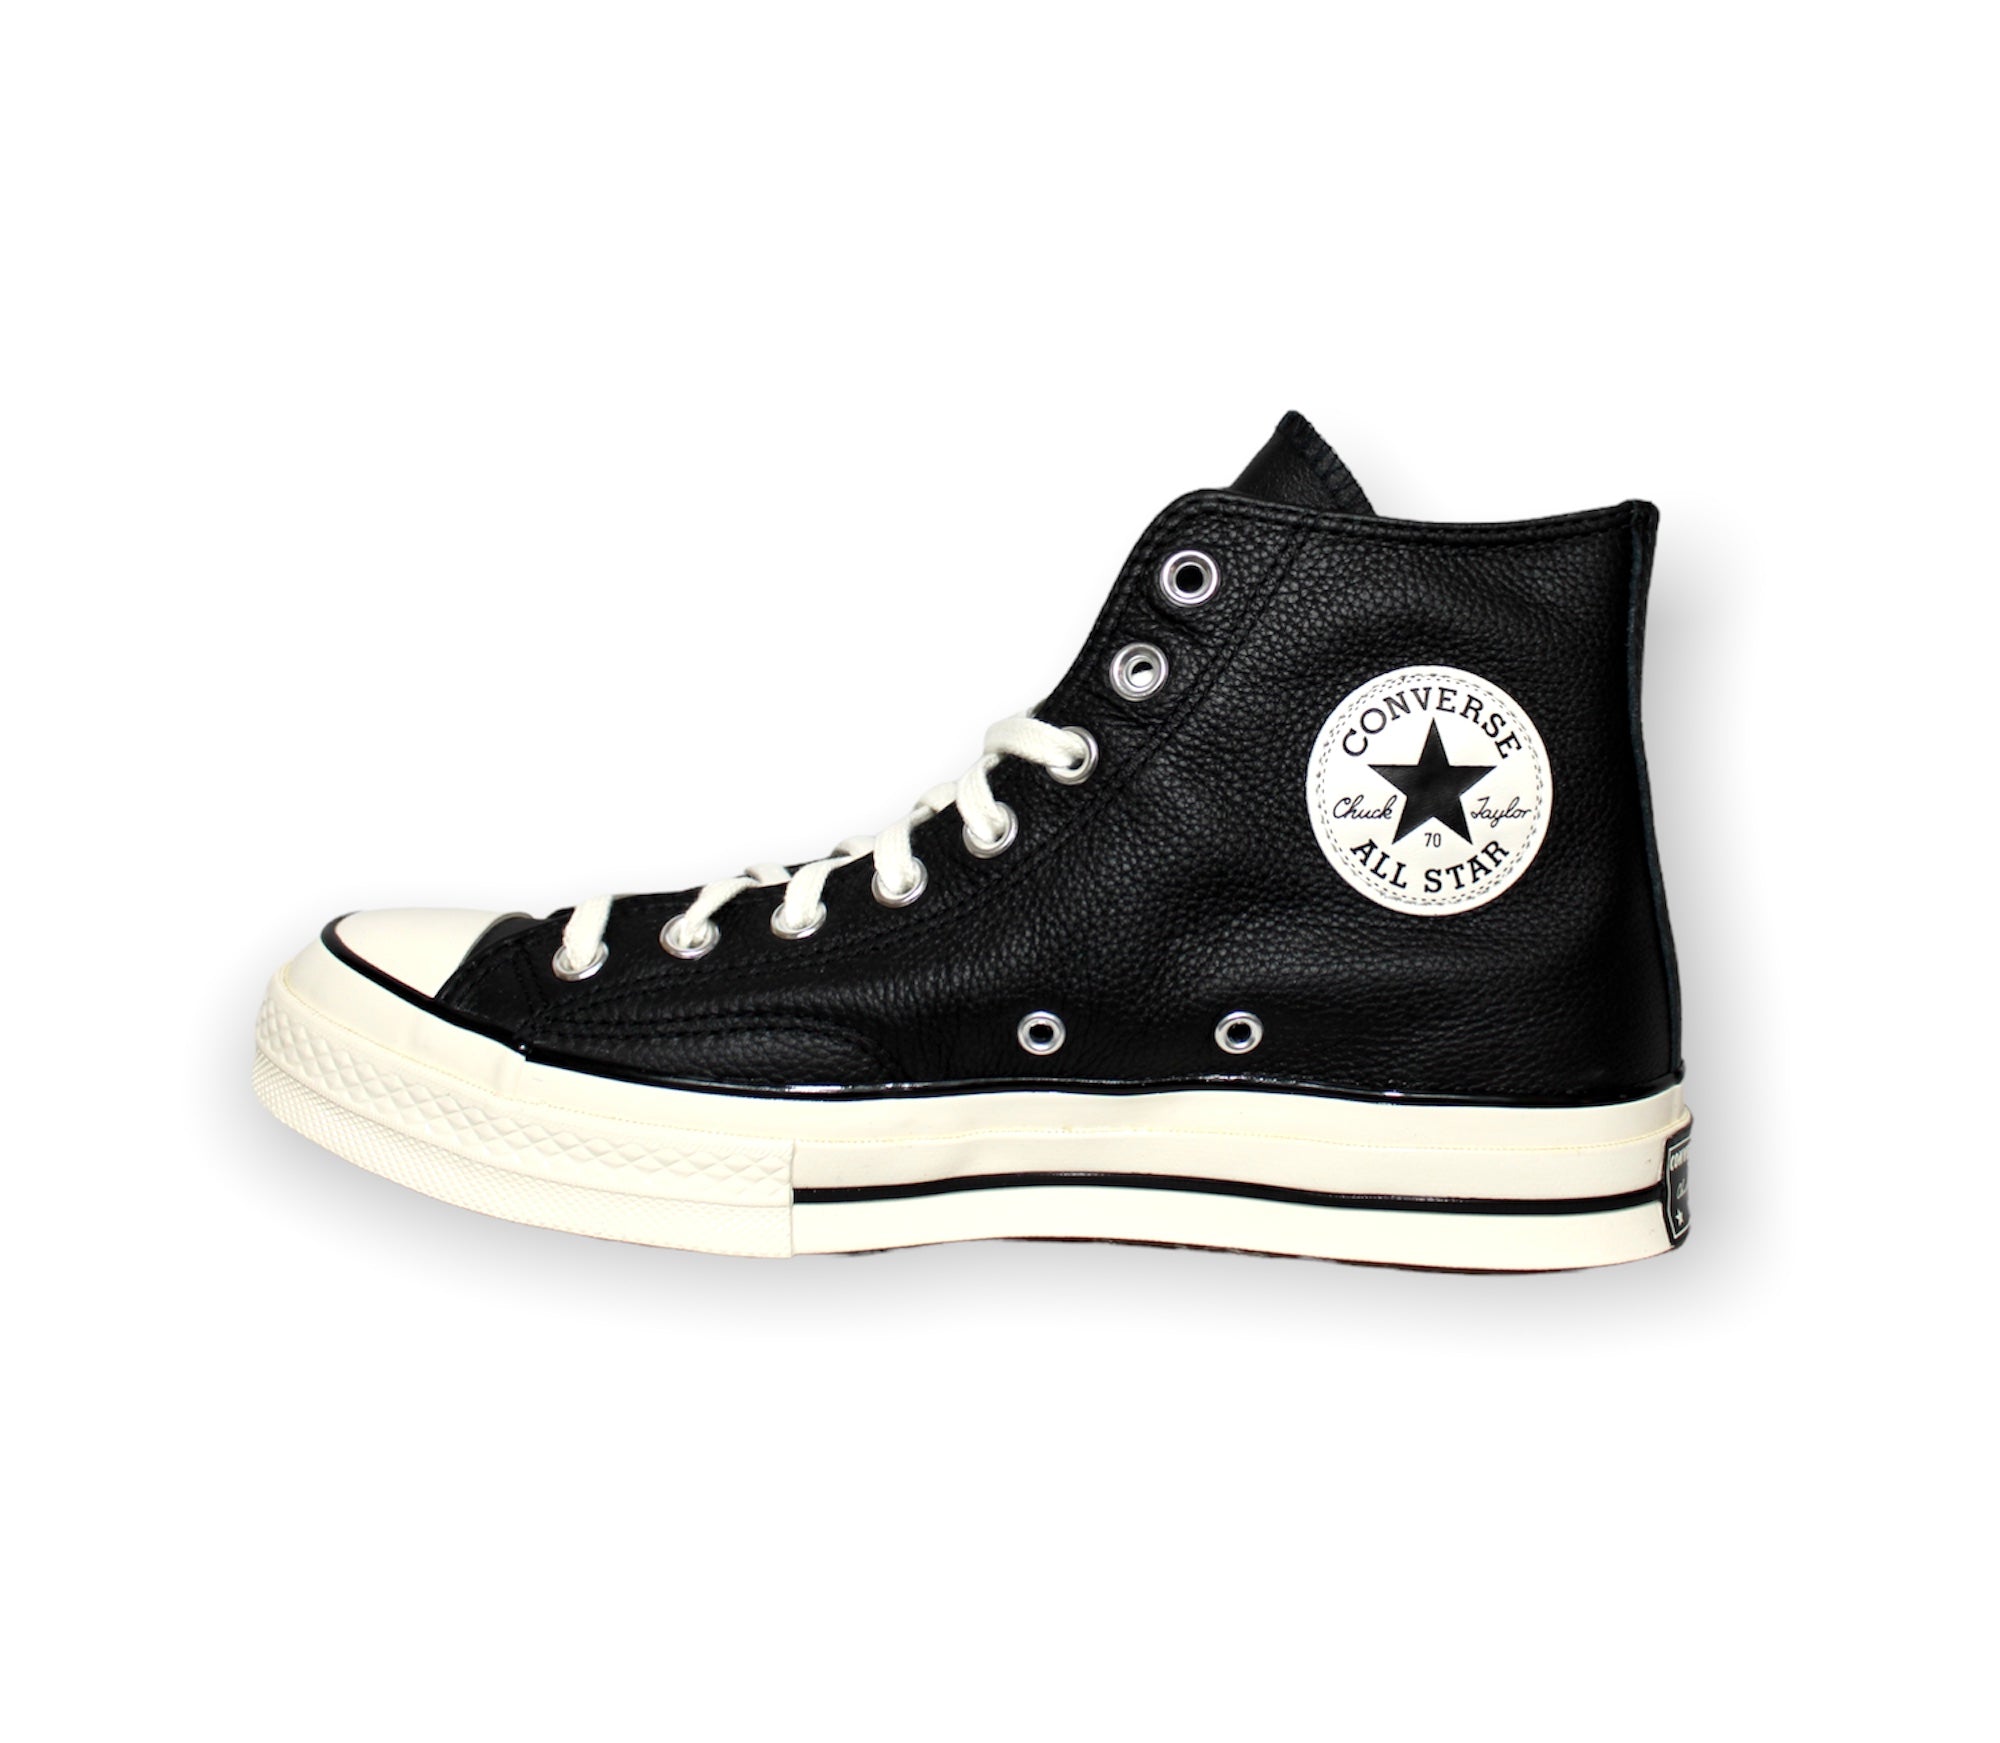 Chuck 70 Leather High-Top Sneakers